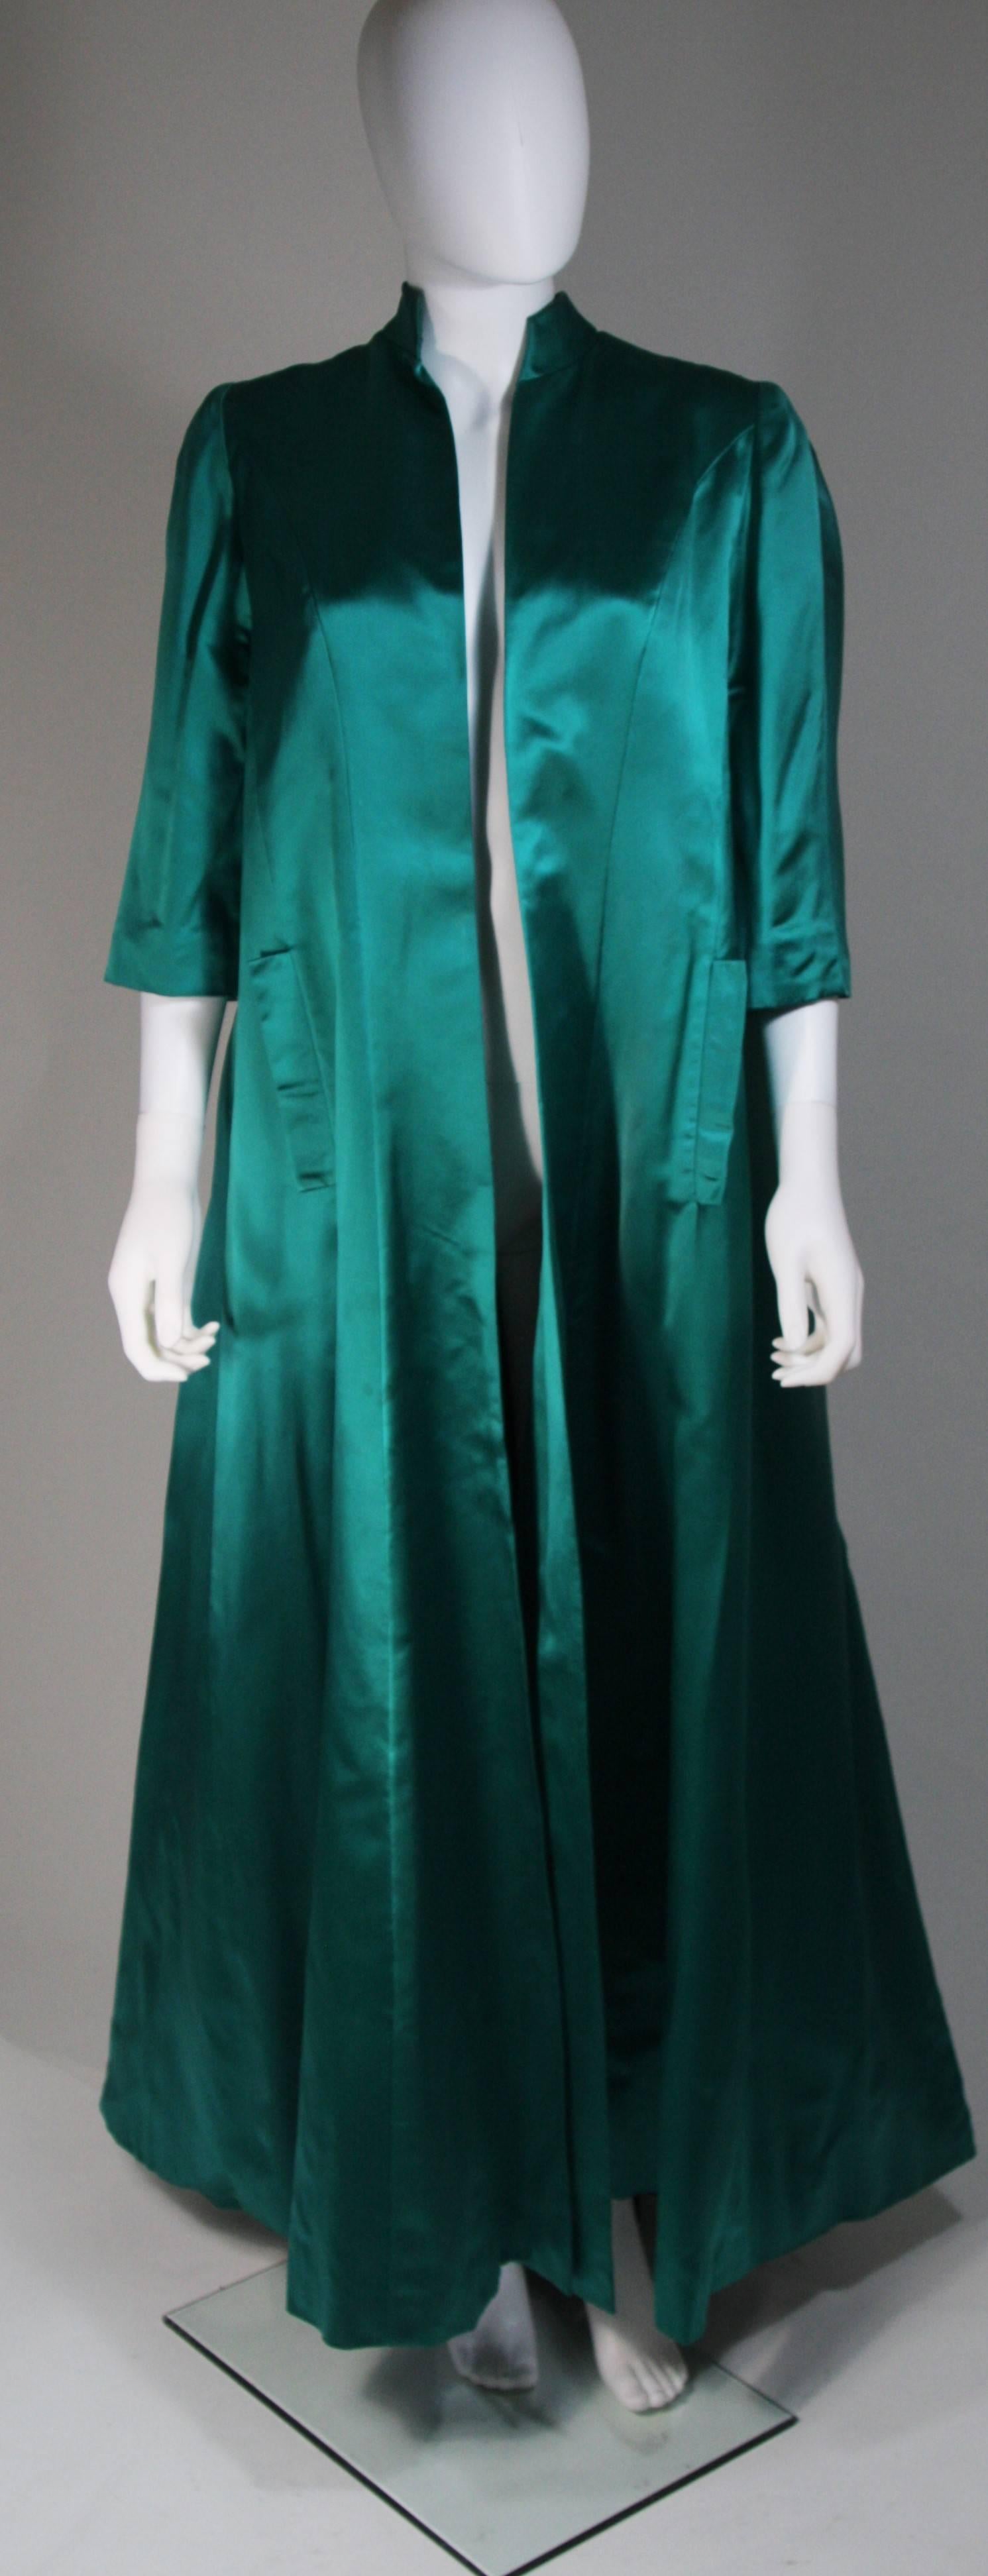 This Galanos coat is composed of a green silk, in an emerald teal hue. The coat has an opera style  featuring godets for flare. There are front pockets, and an open style without closures/fastenings. The coat shows some wear and discoloration, it is